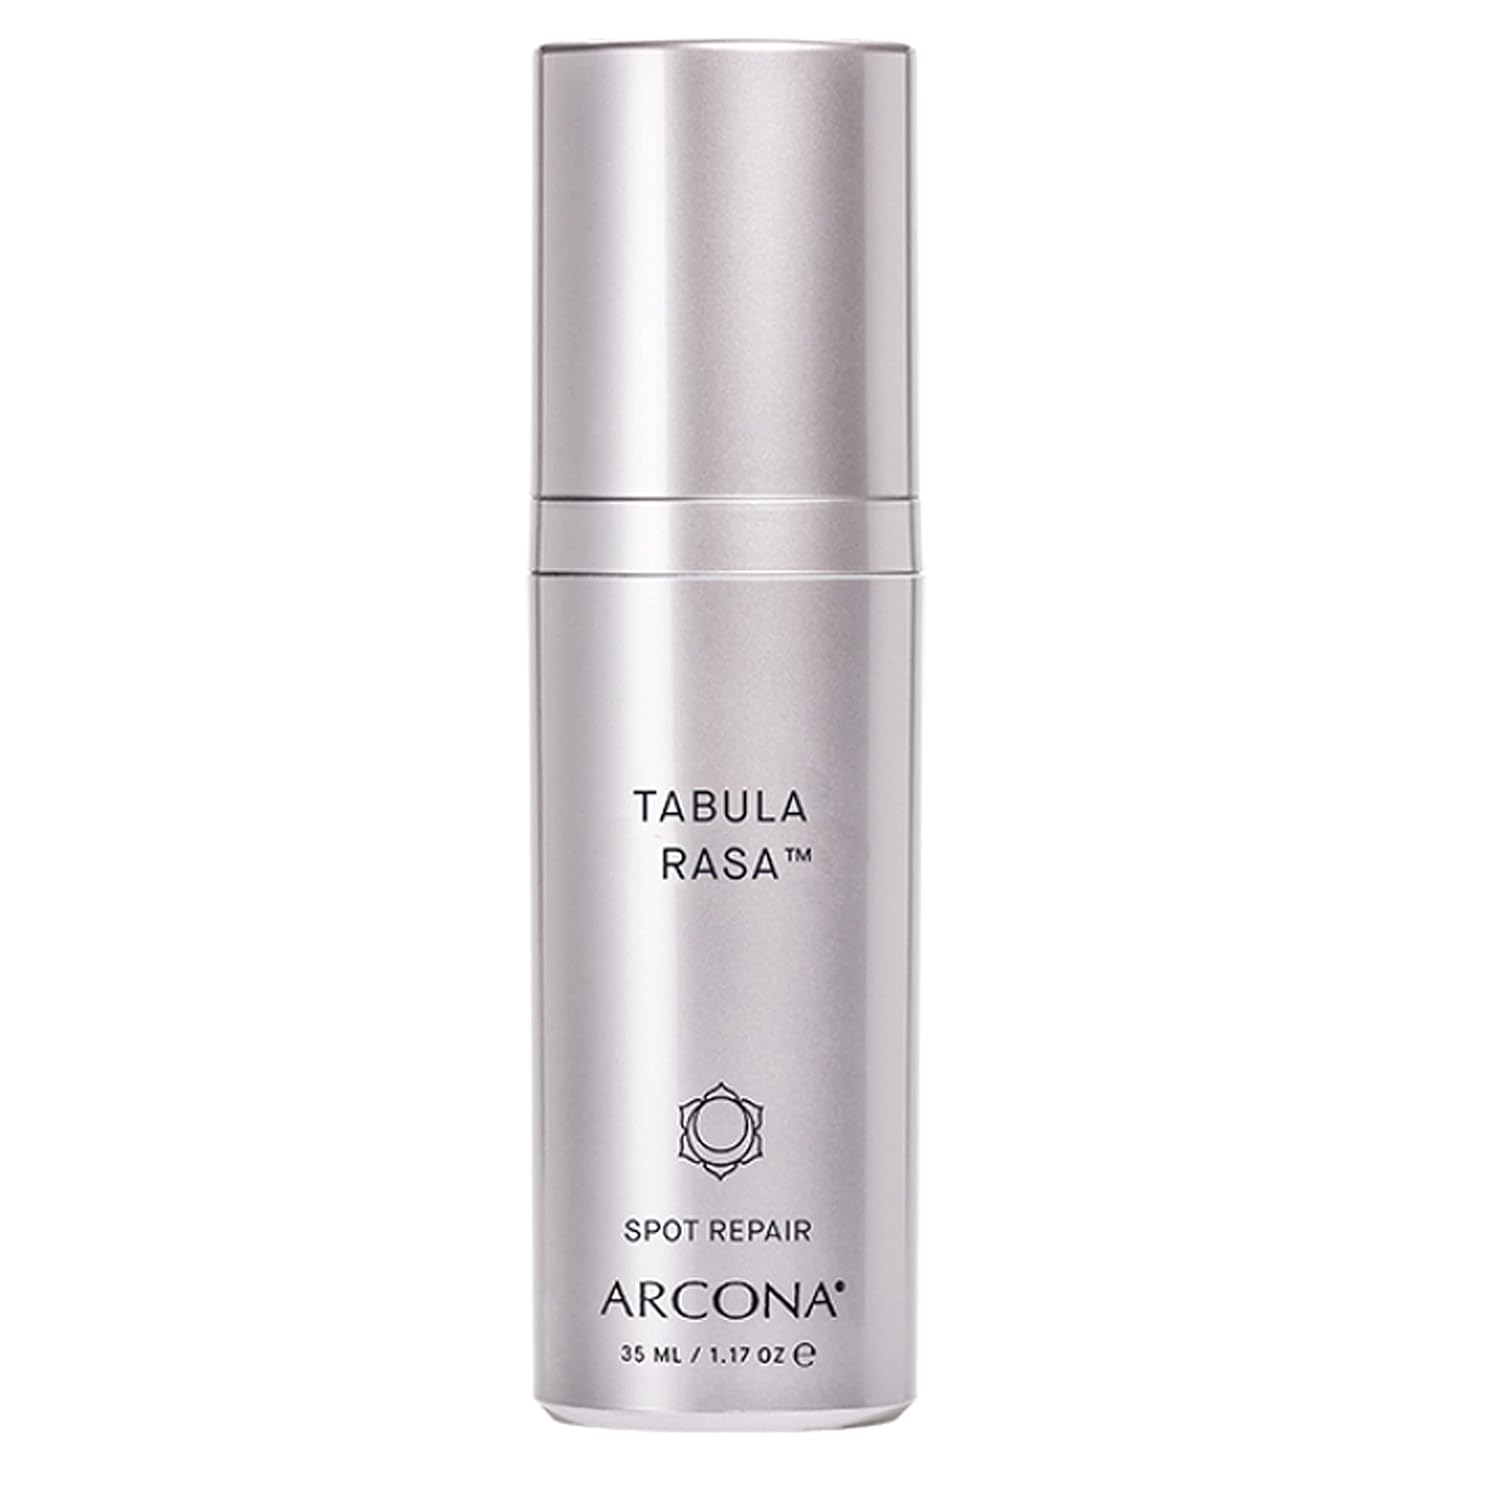 ARCONA Tabula Rasa 1.7  - 2% Lactic Acid, 2% Salicylic Acid and Grape Seed Extract to Gently Exfoliate, Sooth Inammation and Control Oil. Made In The USA